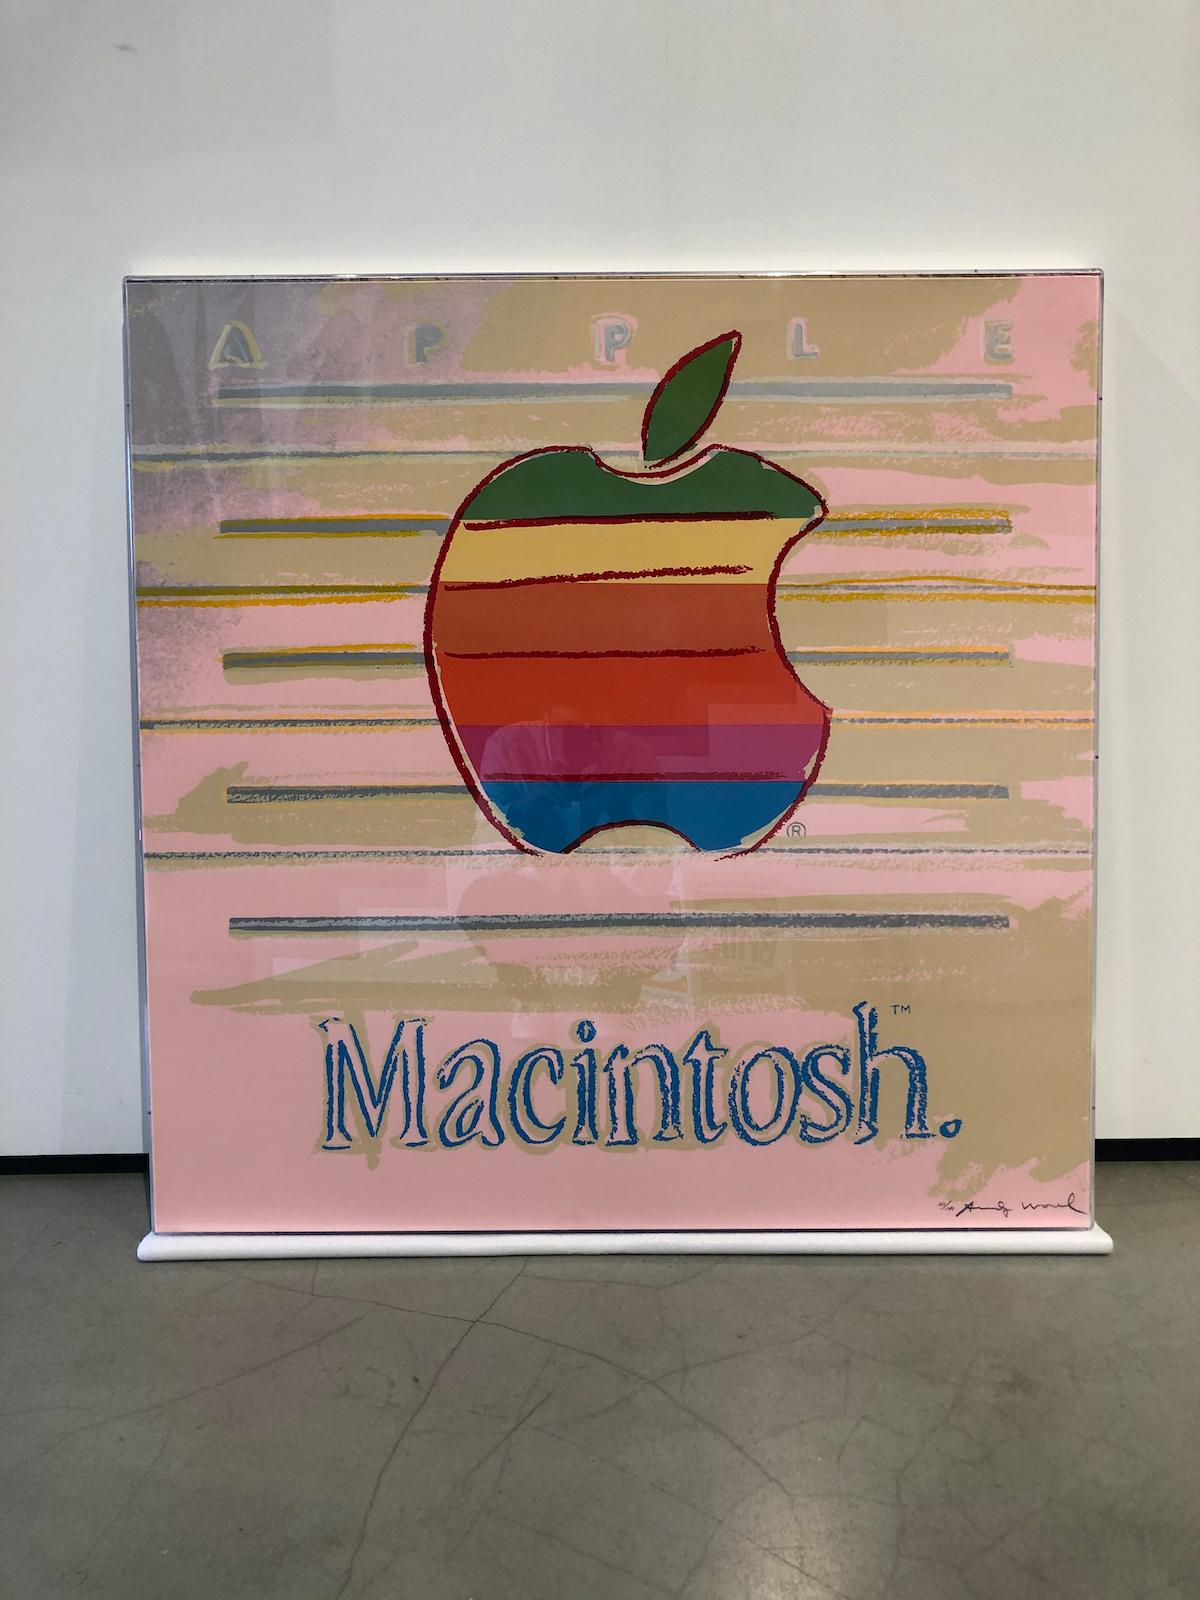 From the edition of 190. The specific edition number will only be provided to the buyer at the actual point of sale. Please message us to request this information at the point of purchase. 

Apple 359 is a screenprint created by Andy Warhol that has